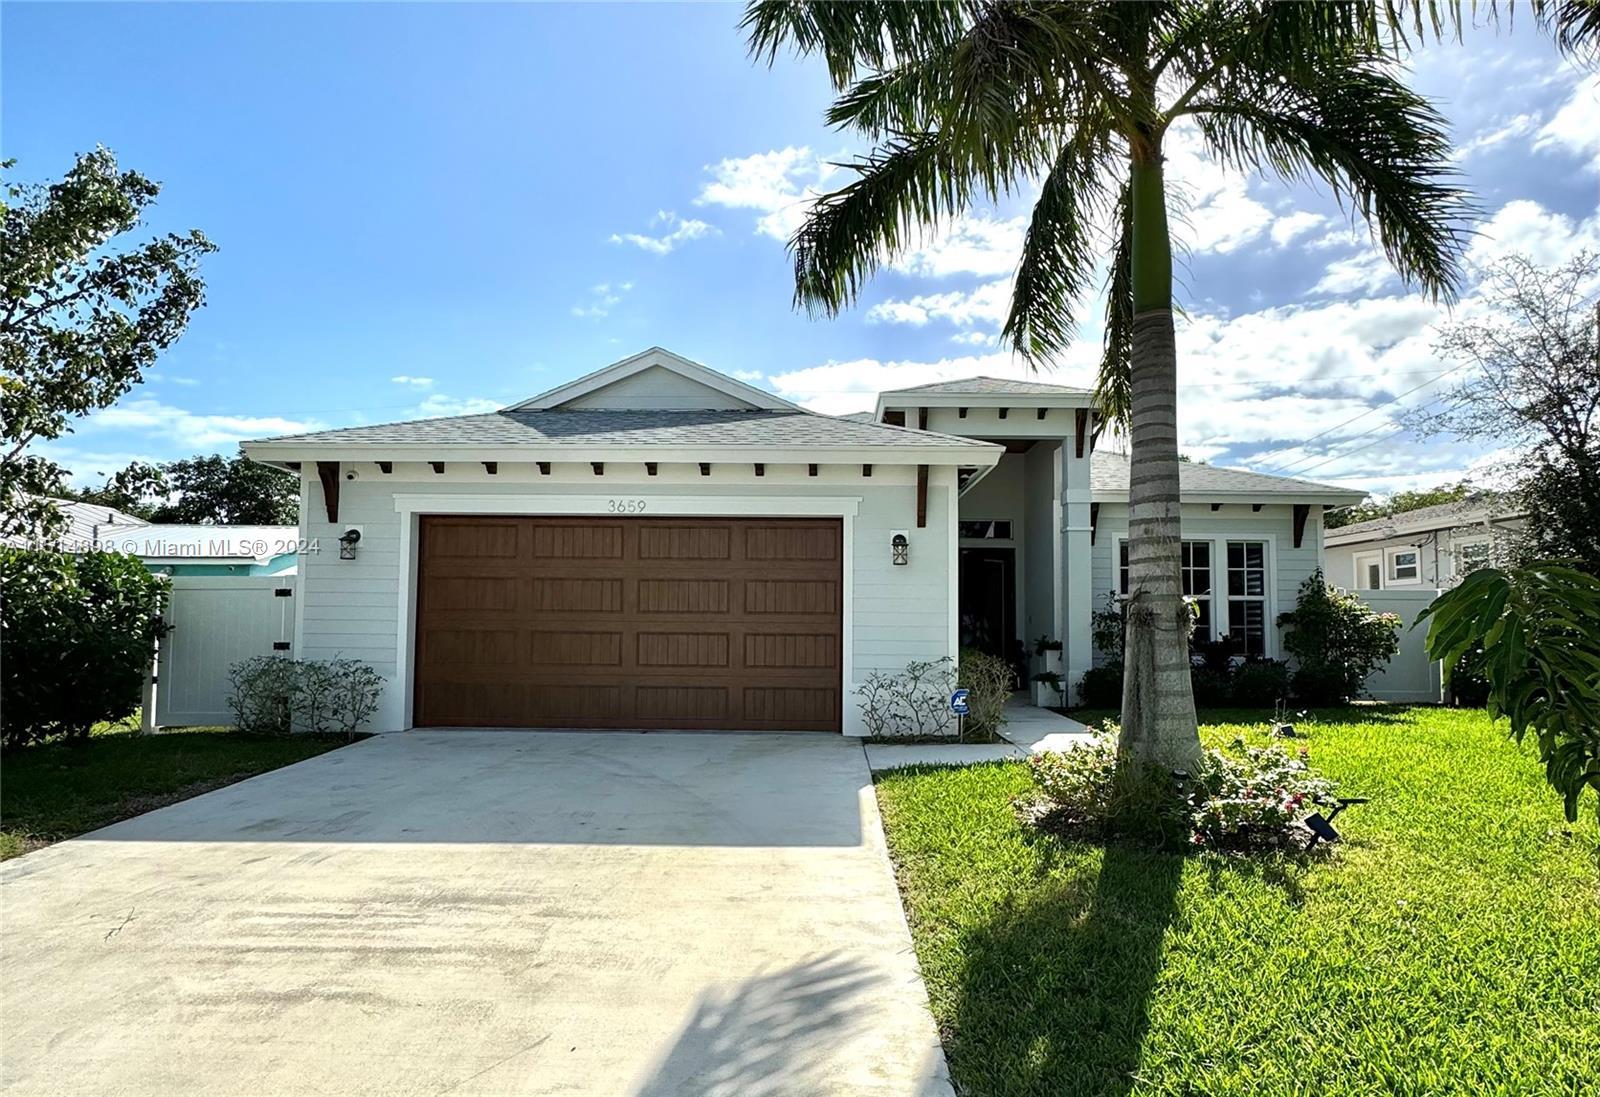 NEW PRICE to sell! Located on exclusive Northwood Shores in WPB. Newer construction built in 2021. C